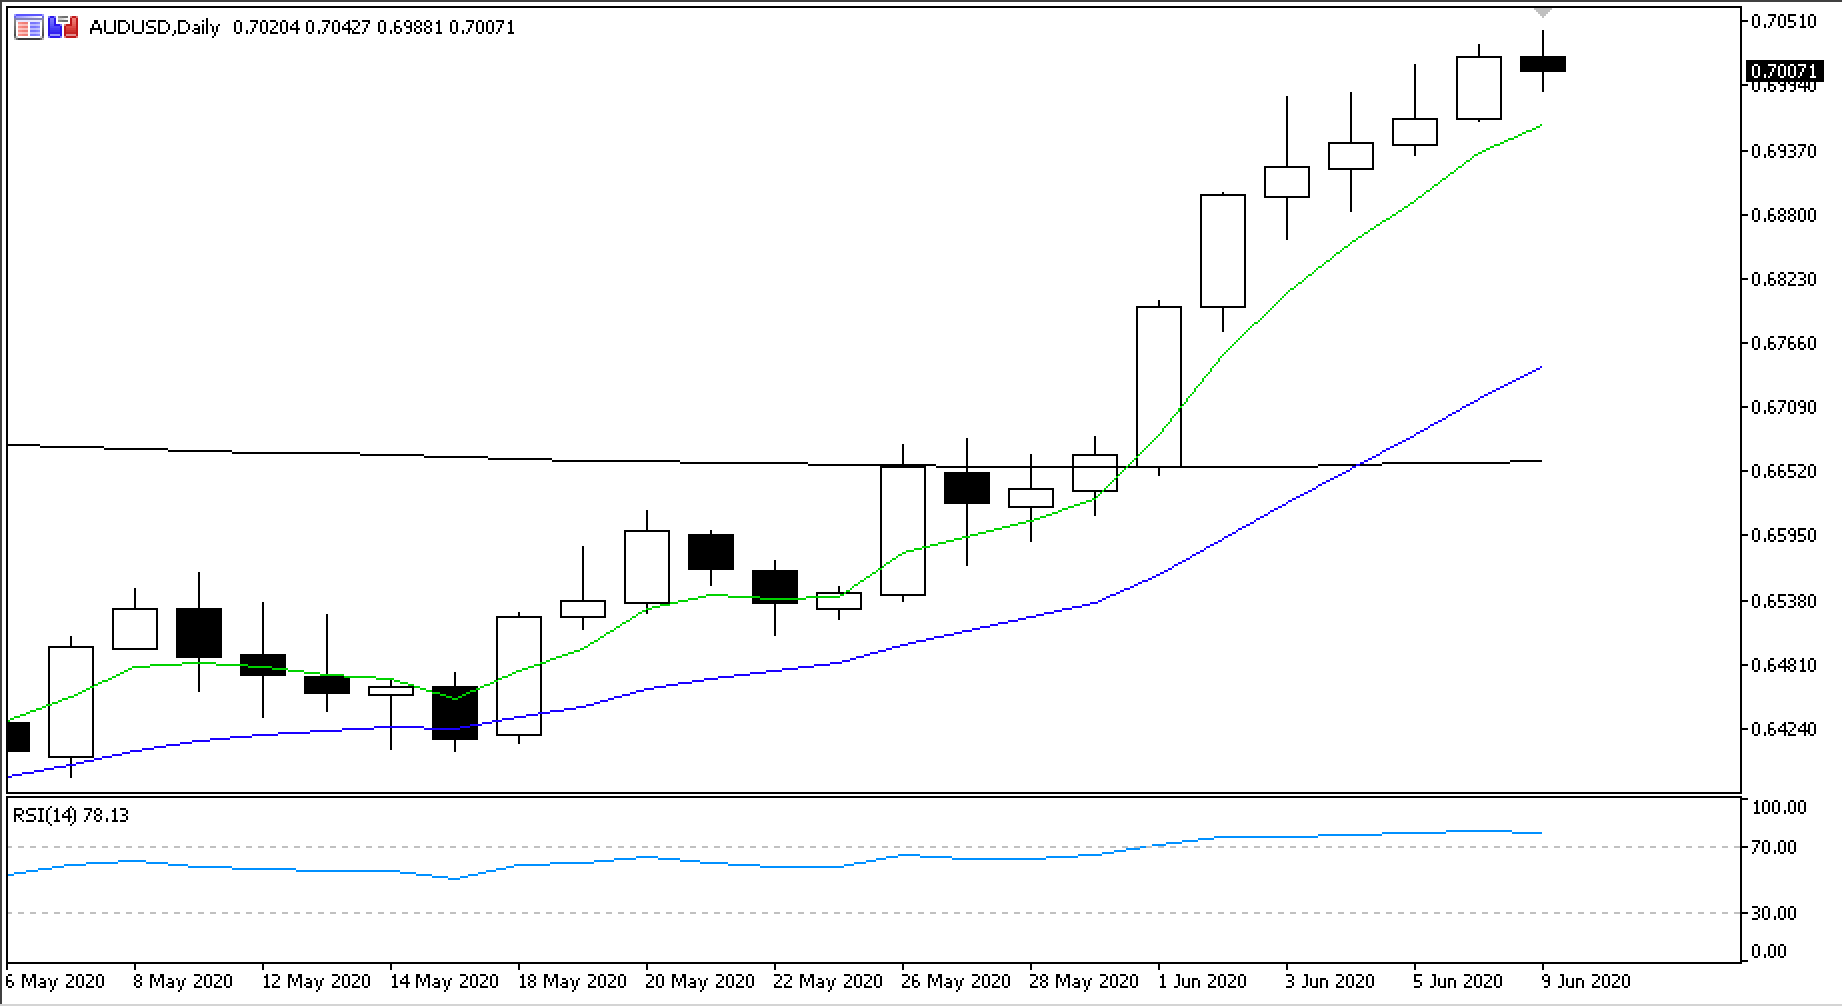 Your guide to trading the AUD/USD pair